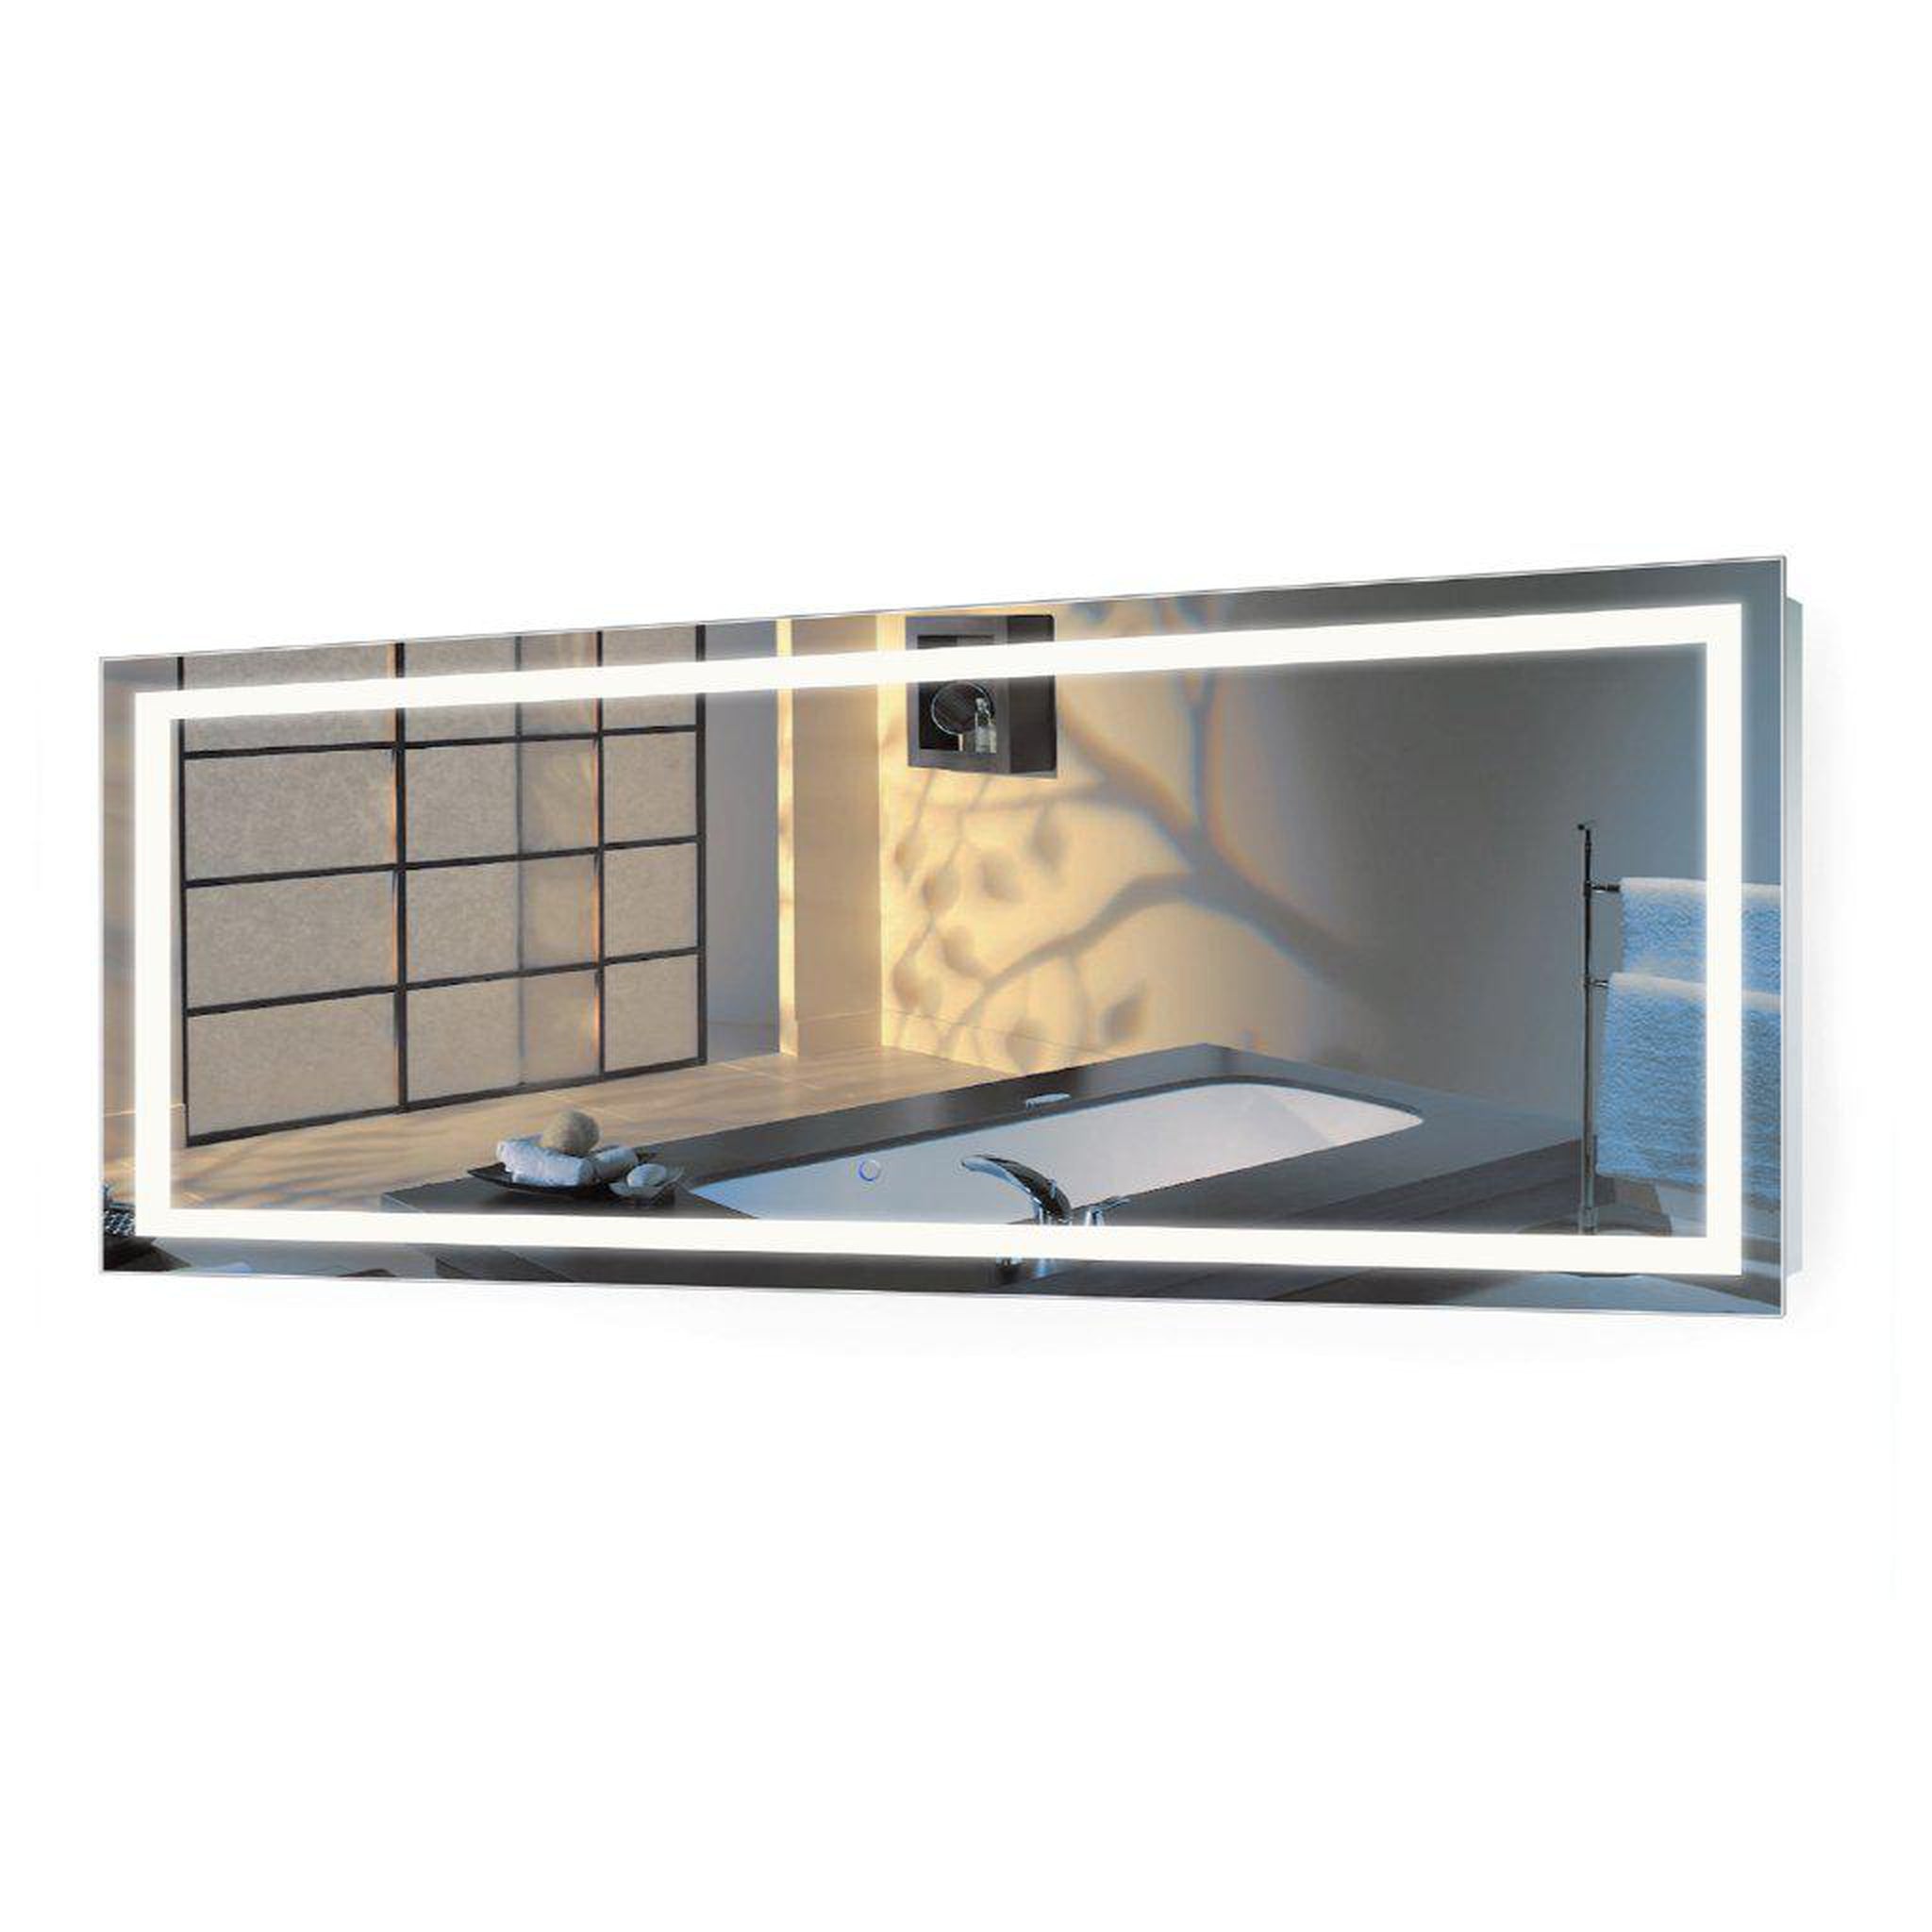 Krugg Reflections, Krugg Reflections Icon 72" x 30" 5000K Rectangular Wall-Mounted Illuminated Silver Backed LED Mirror With Built-in Defogger and Touch Sensor On/Off Built-in Dimmer